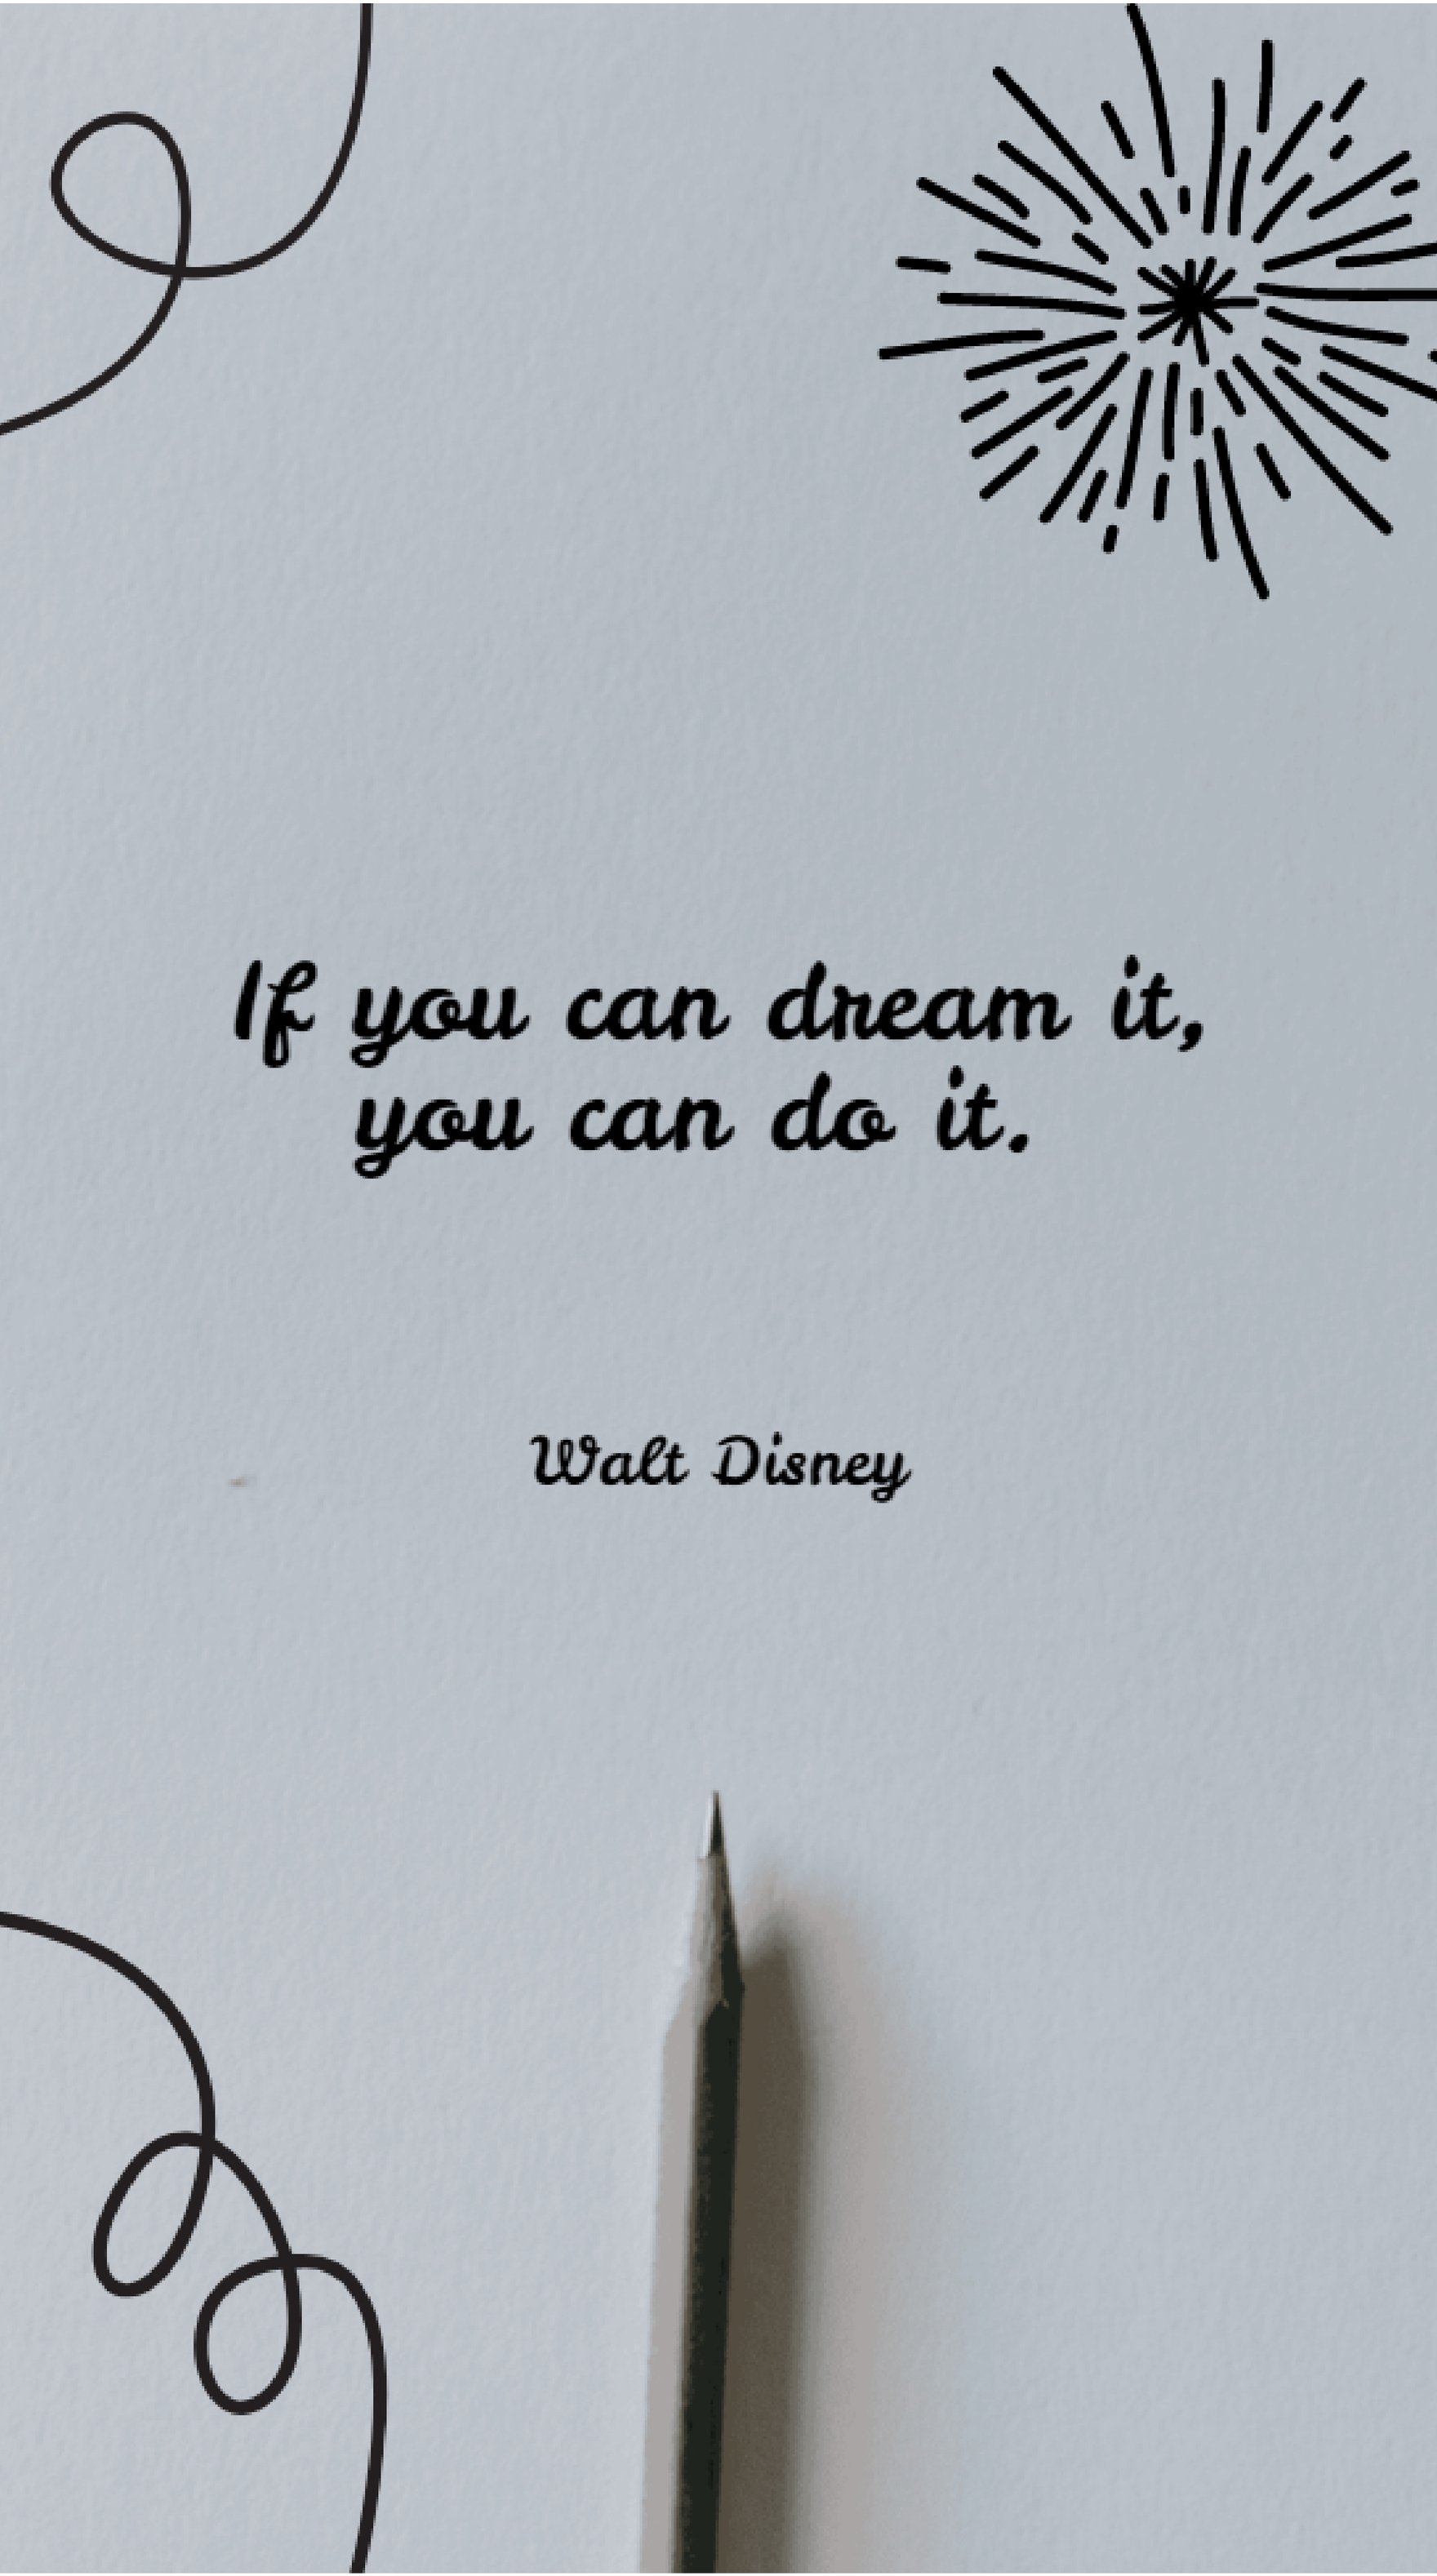 Walt Disney - If you can dream it, you can do it.